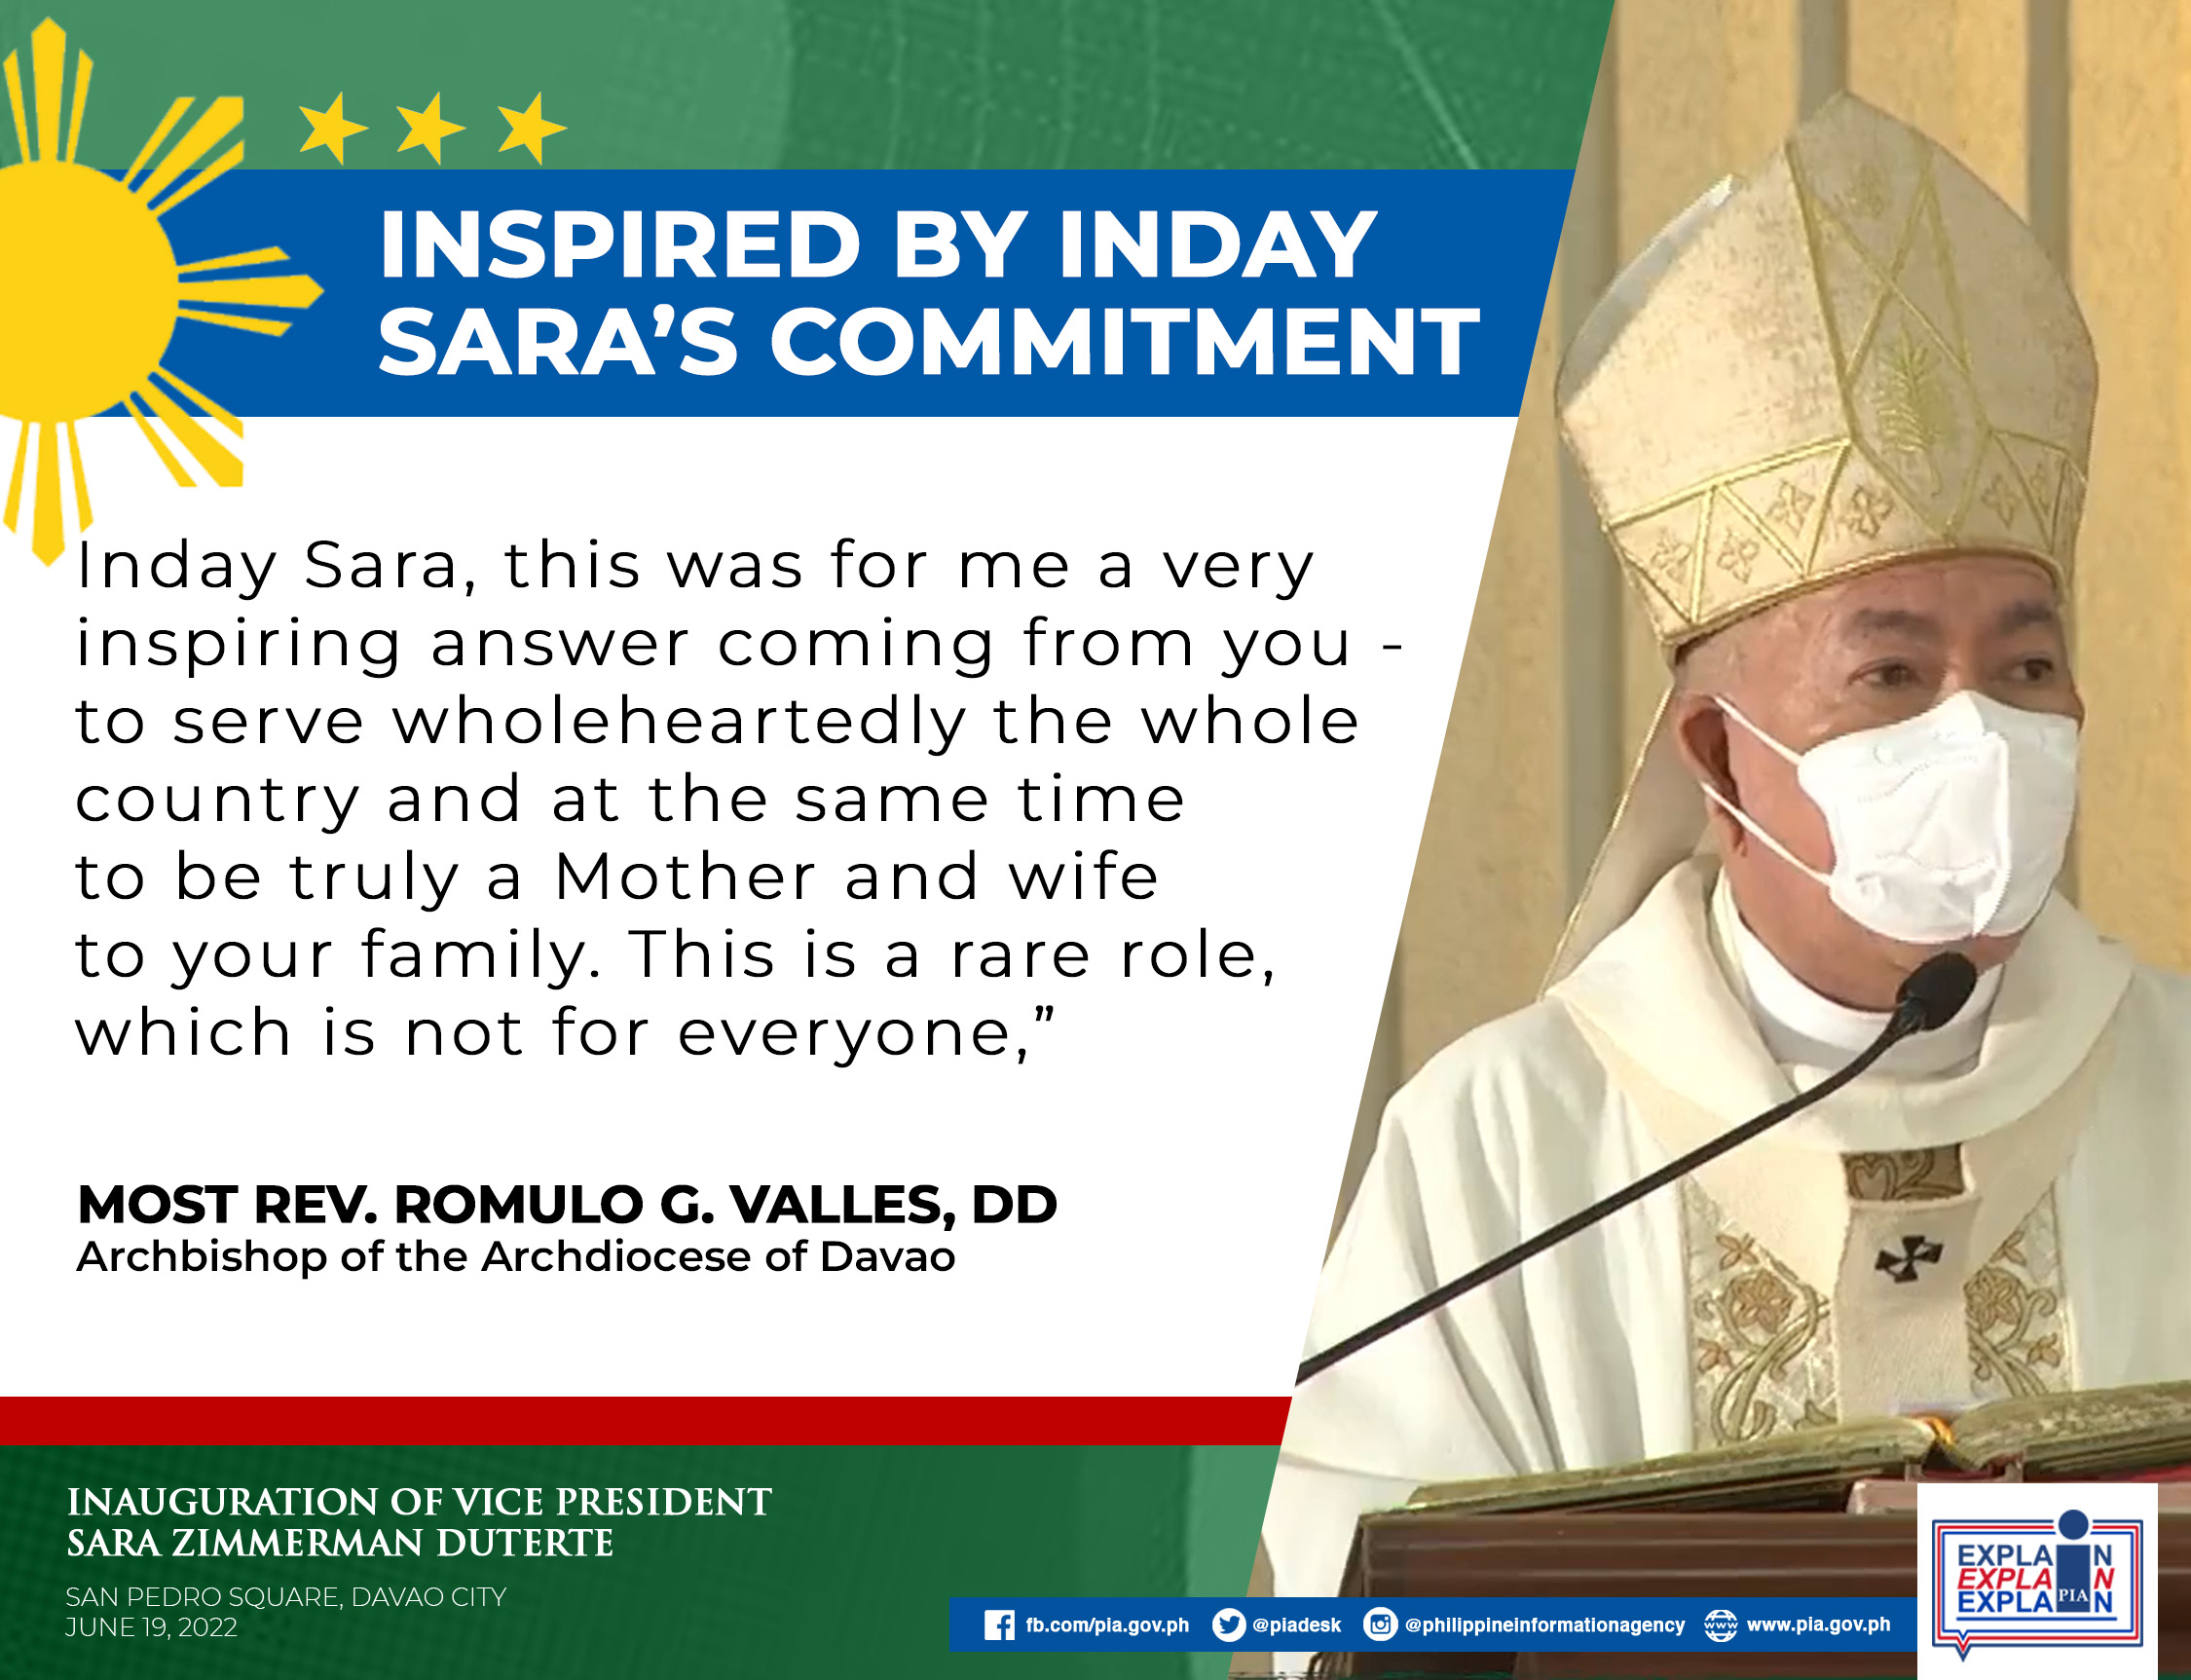 Homily of Archbishop Romulo G. Valles during the Inauguration of Vice President elect Sara Z. Duterte